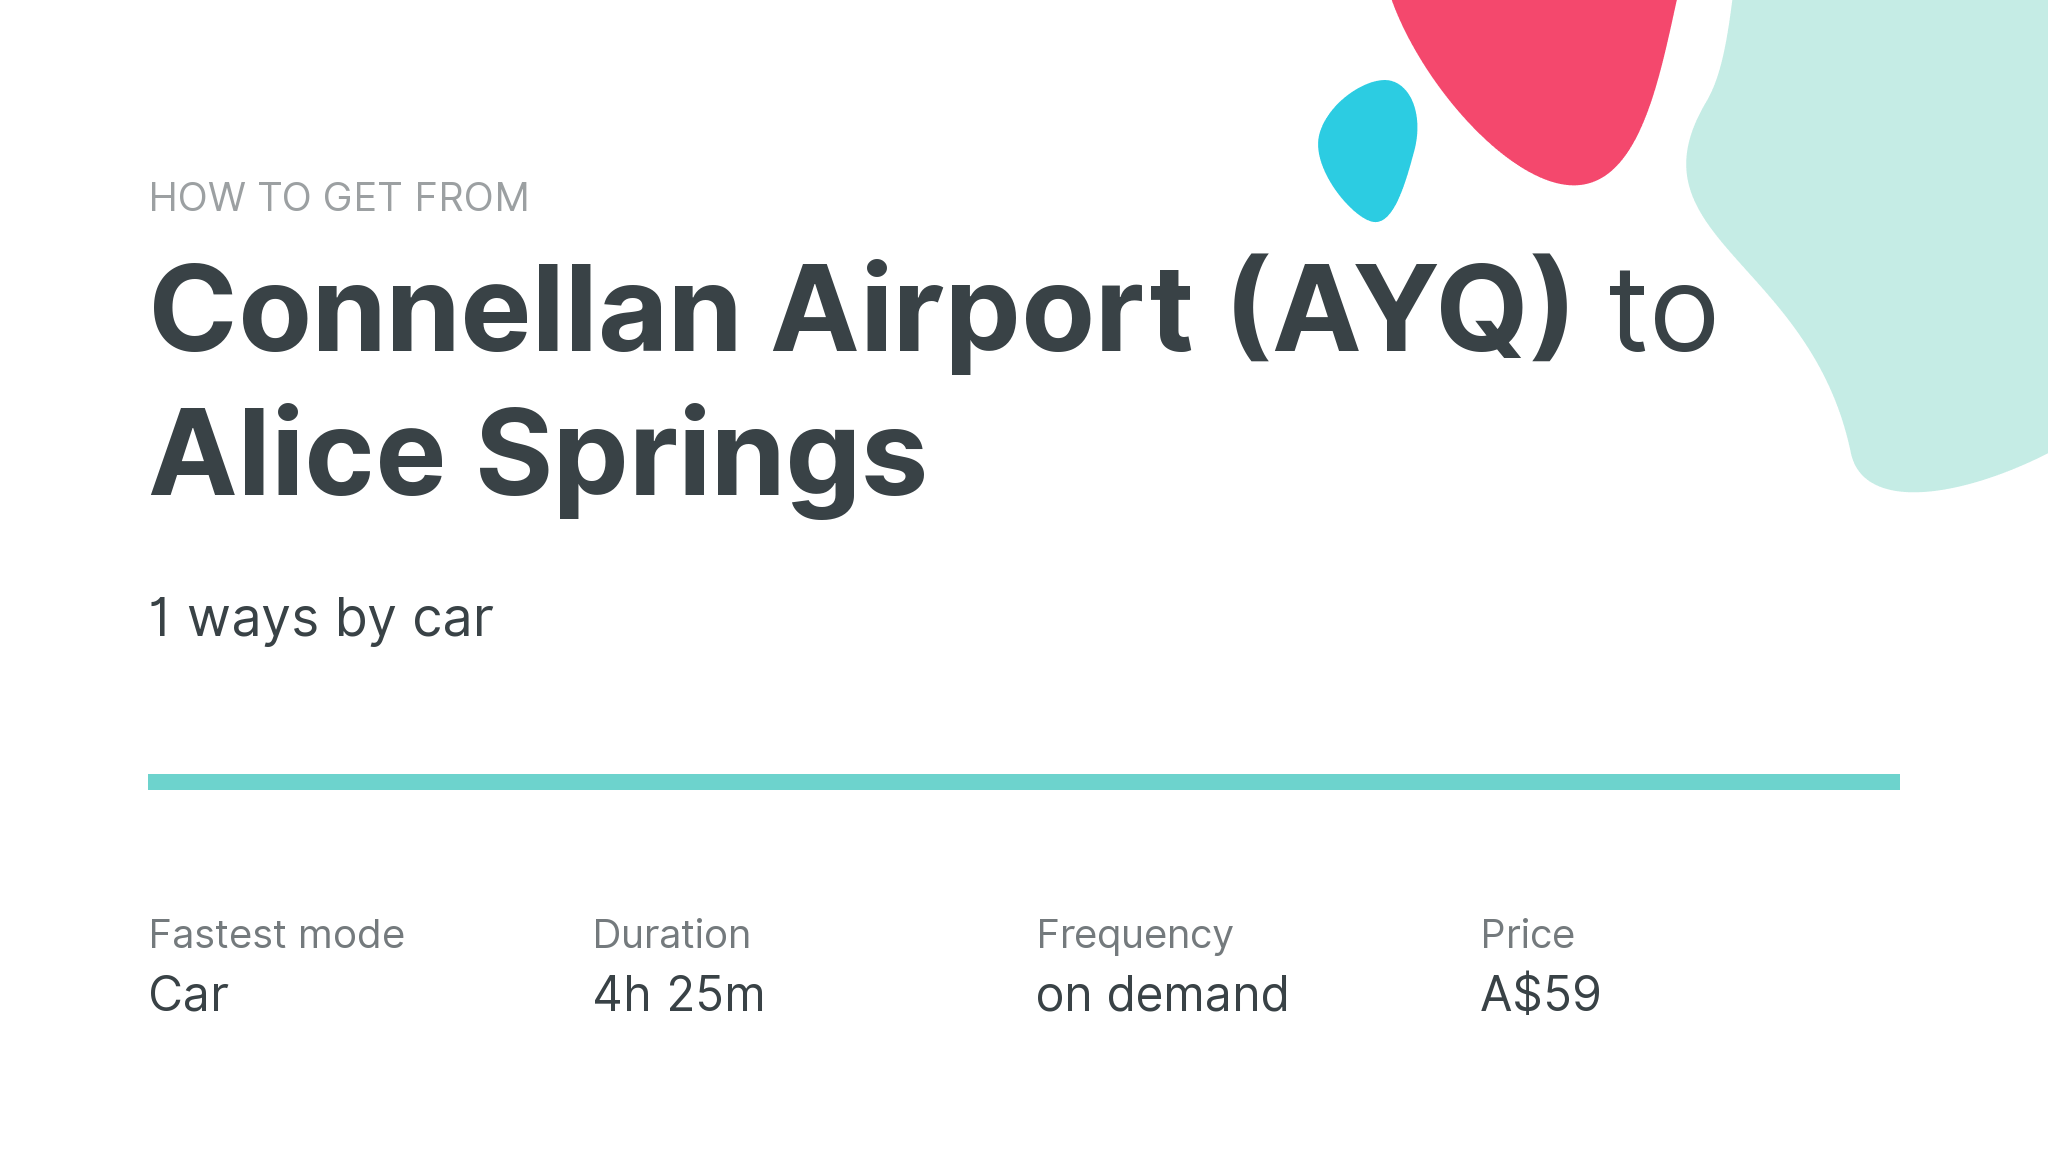 How do I get from Connellan Airport (AYQ) to Alice Springs